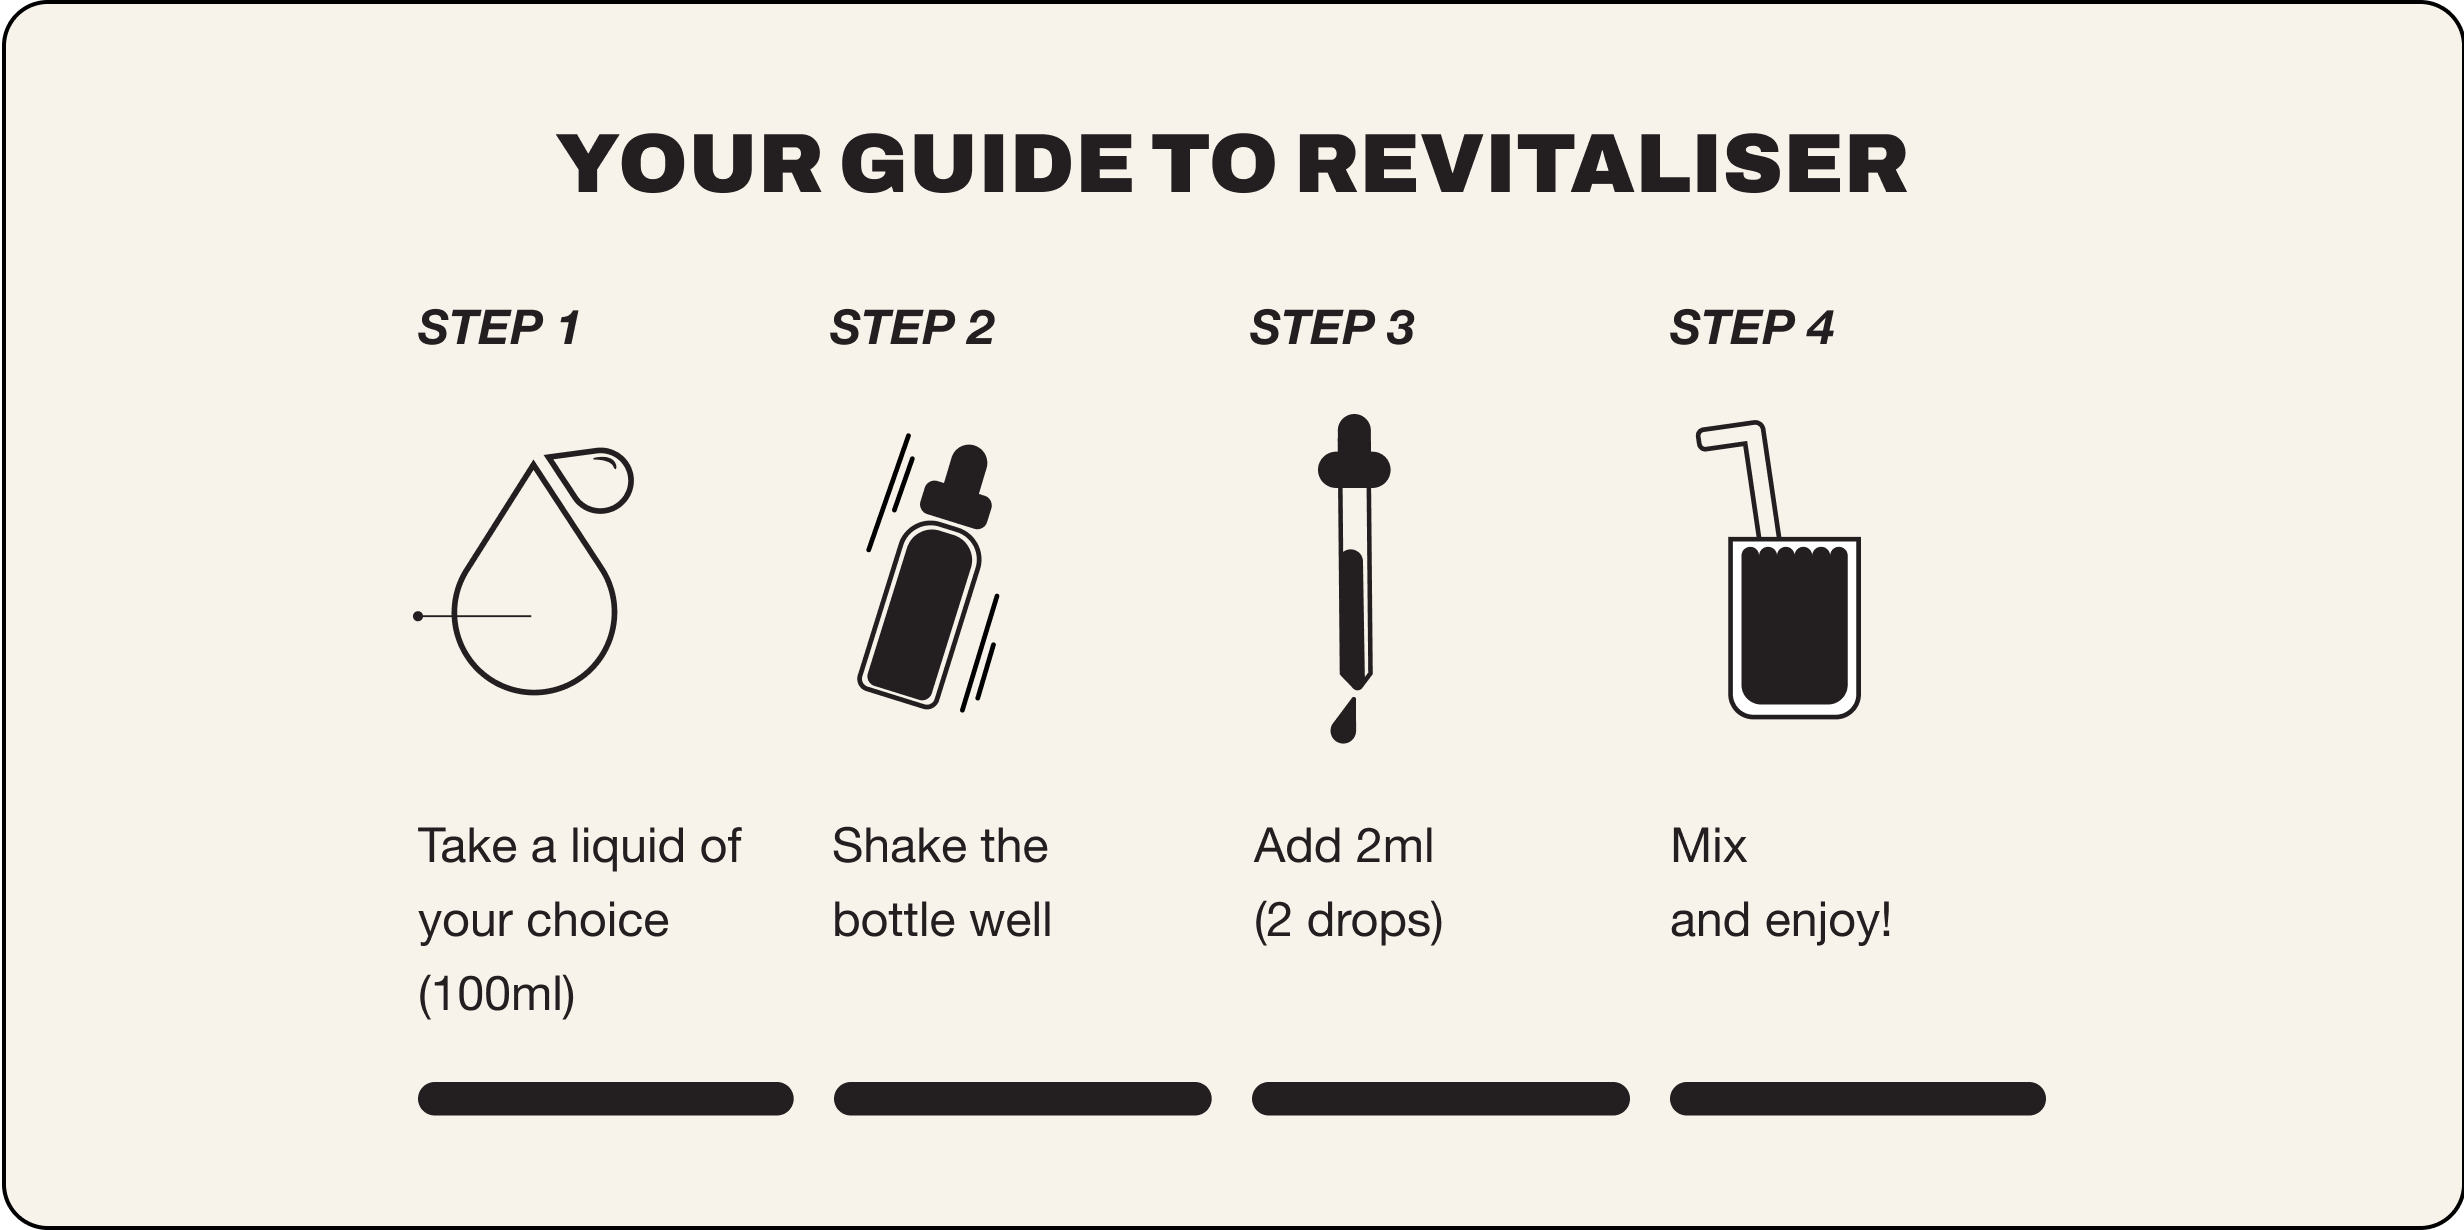 Your guide to revitaliser. Step 1 take a liquid of your choice 150ml, step 2 shake the bottle well, step 3 add 2ml (2 drops), step 4 mix and enjoy!